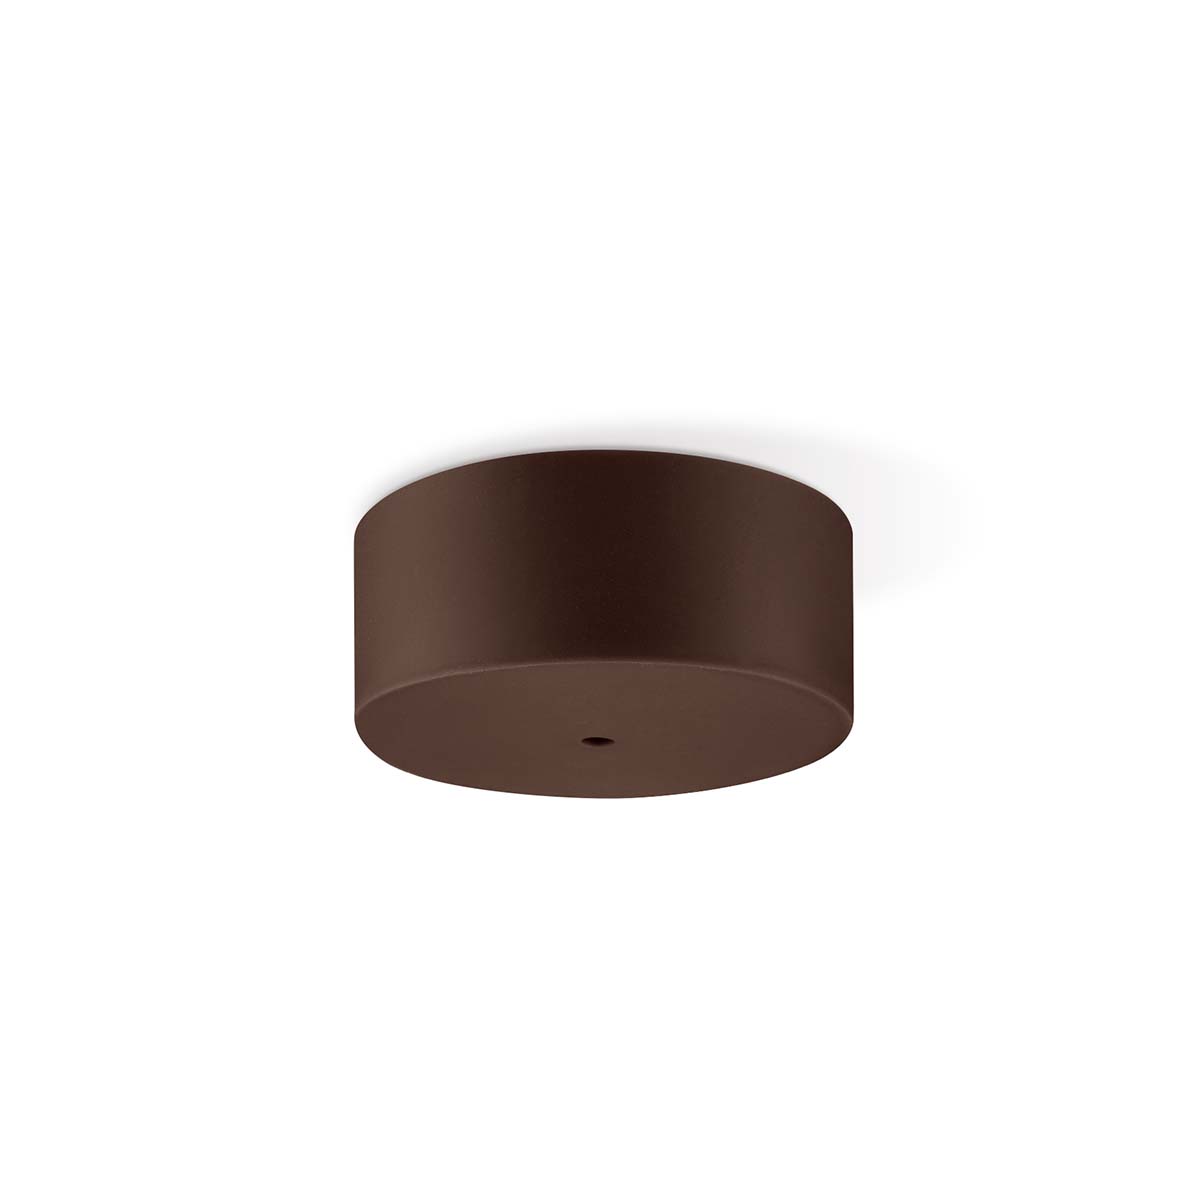 Tangla lighting - TLCP022-01BN - Silicon 1 Light round canopy cylinder - brown